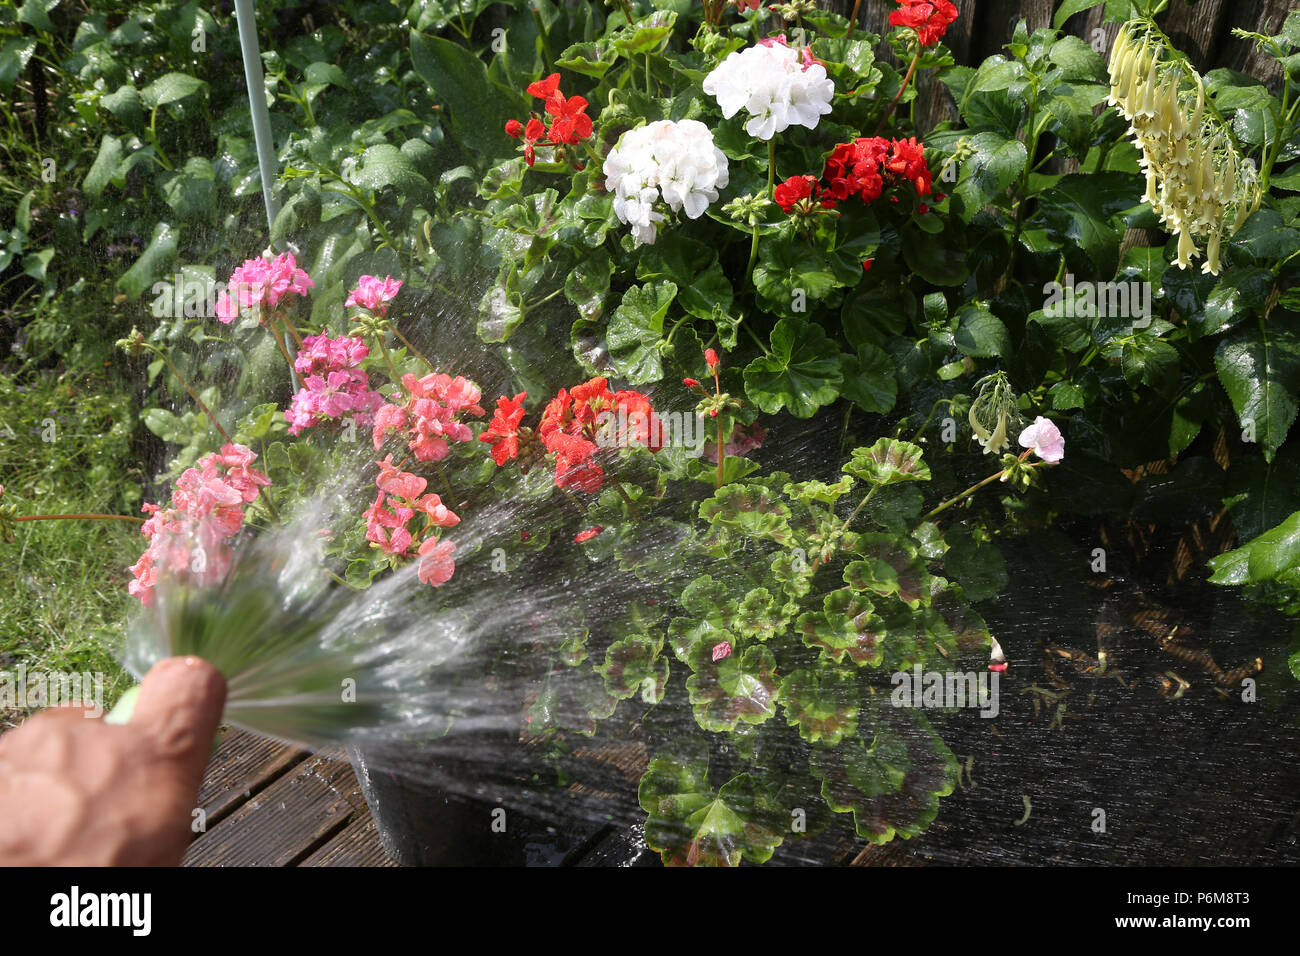 London. UK 1 July 2018 - A gardener watering the plants and lawn using a water hosepipe in his garden. Northern Ireland brought in hosepipe ban in six years as water reservoir levels have dropped due to mini heatwave in the UK. According to the the Met Office July will be dry, sunny and above average temperatures across the UK.   Credit: Dinendra Haria/Alamy Live News Stock Photo